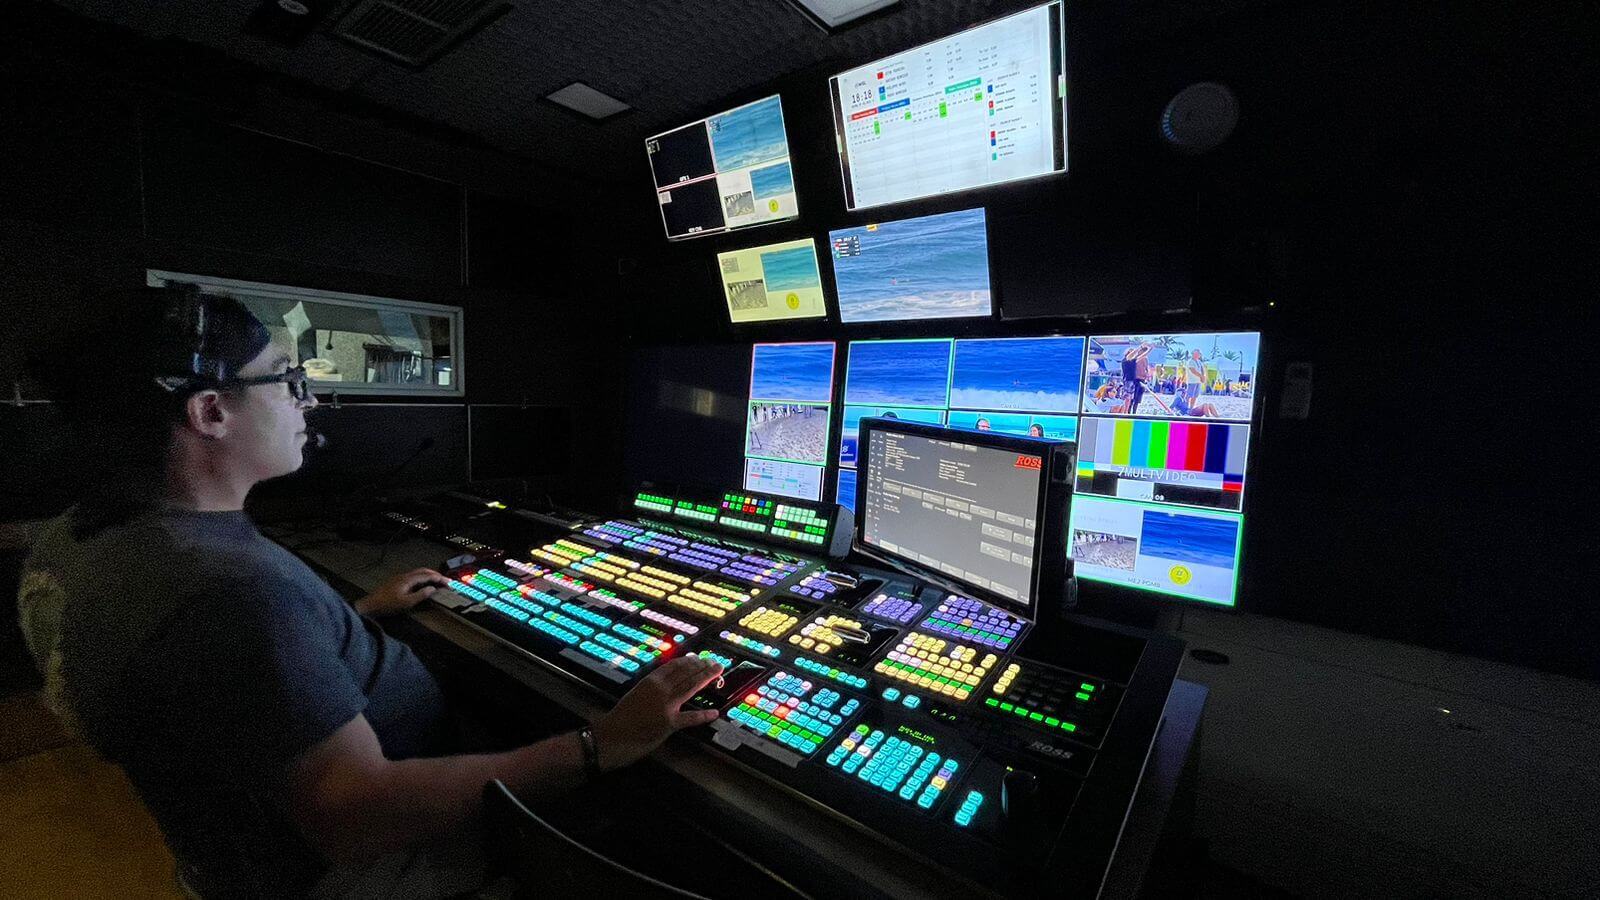 An image of a person in a production control room sitting in front of ross switchers and monitors